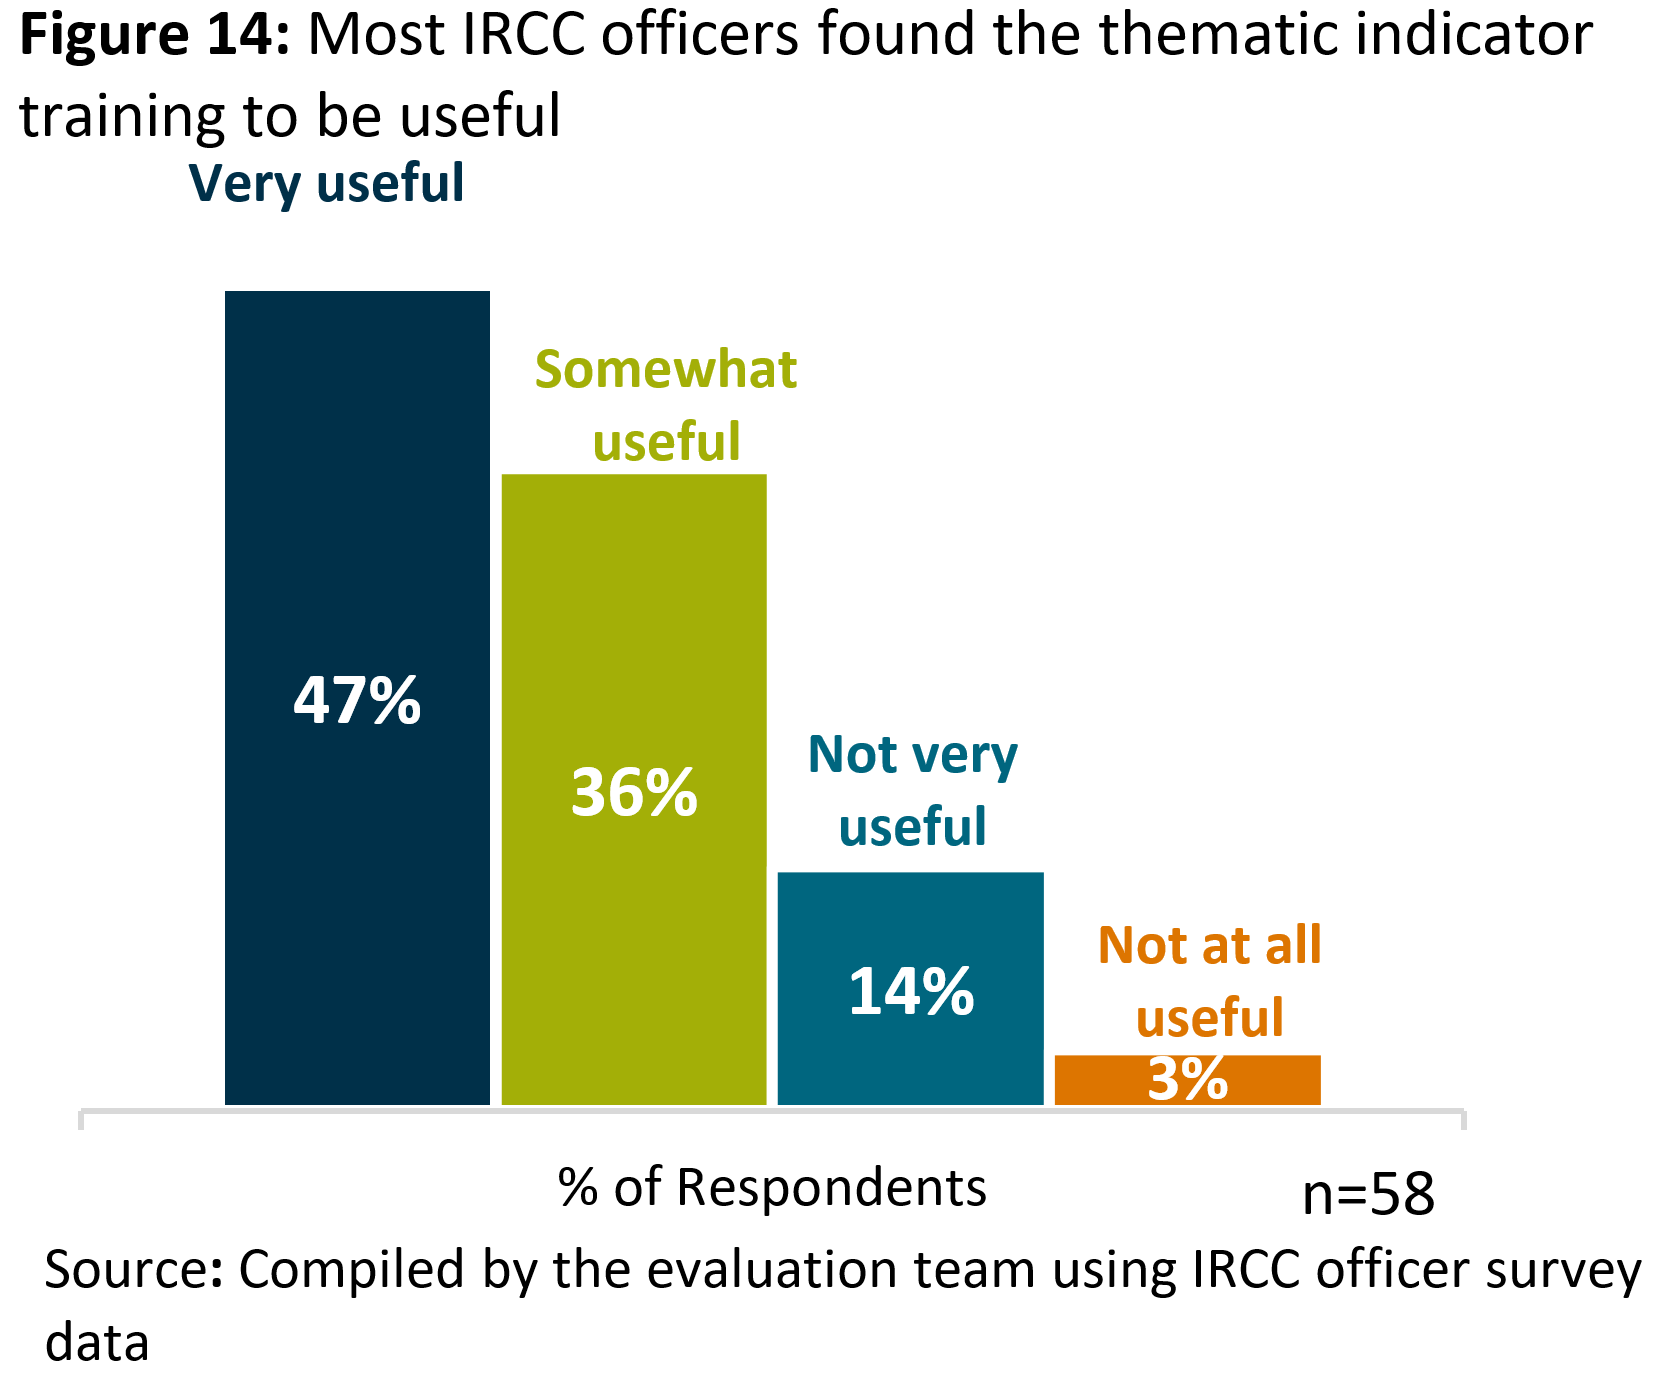 Figure 14 shows that most <abbr>IRCC</abbr> officers found the thematic indicator training to be useful